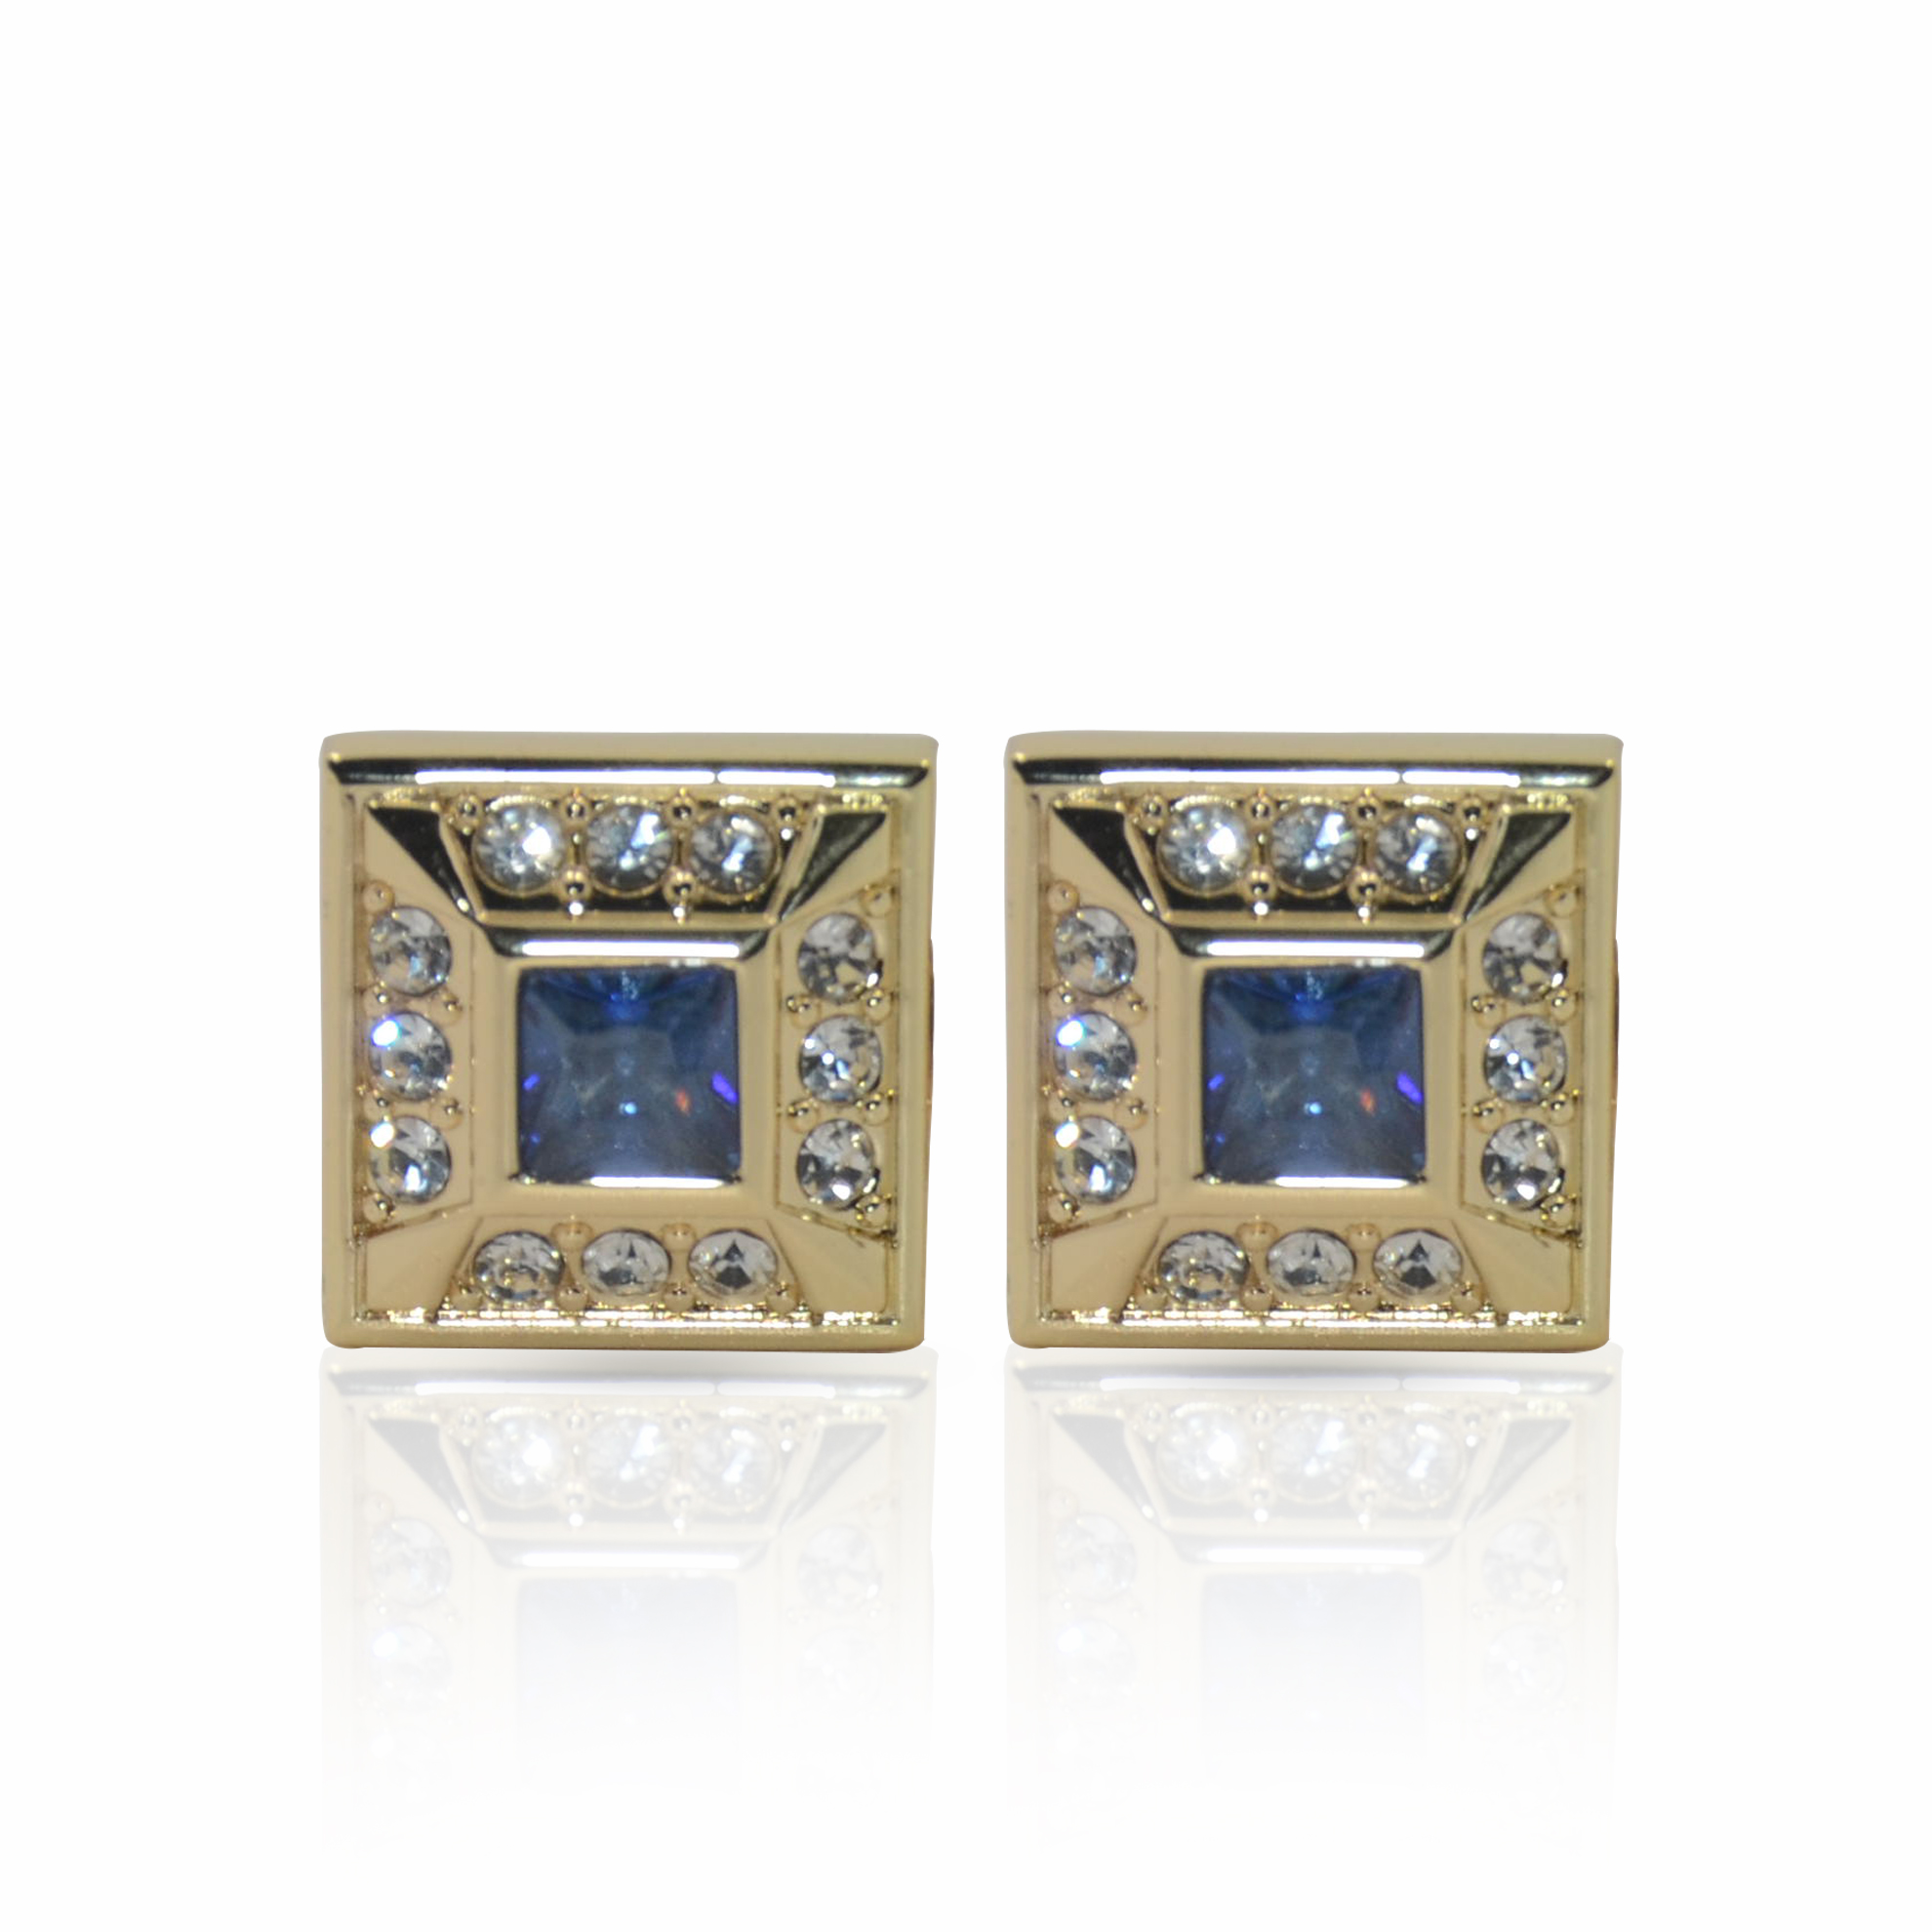 Cufflers Novelty Gold Square Cufflinks CU-2031 with Free Gift Box